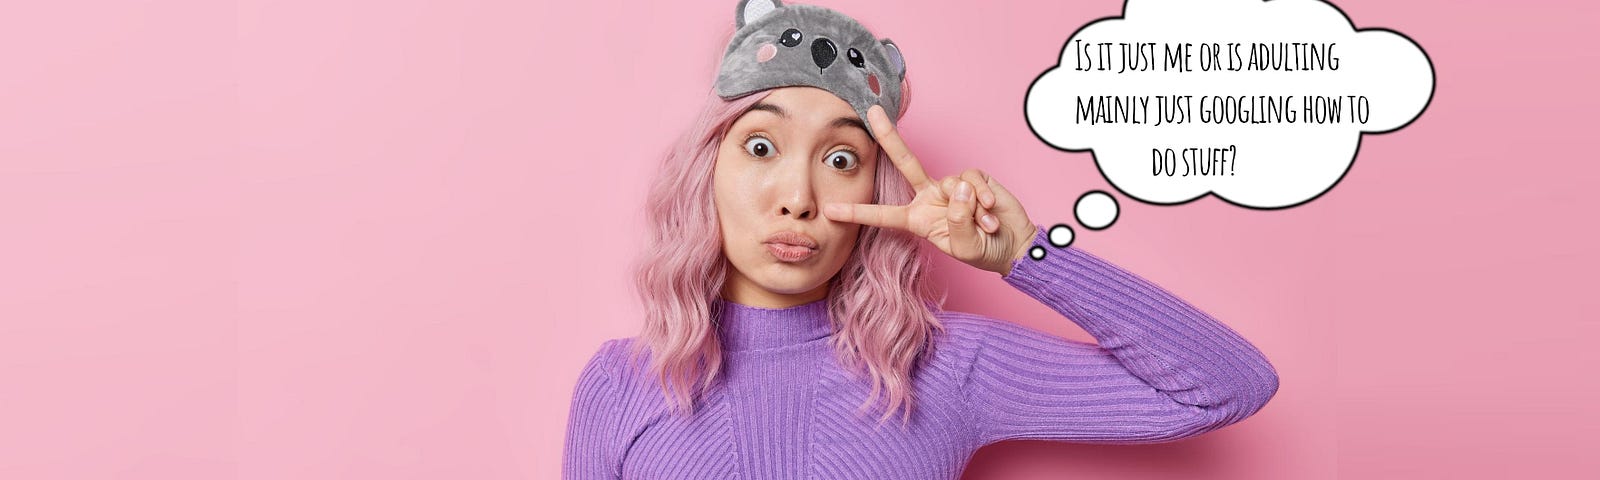 Young woman with pink hair making a silly face and a cartoon koala sleep mask on her head — throwing a peace sign